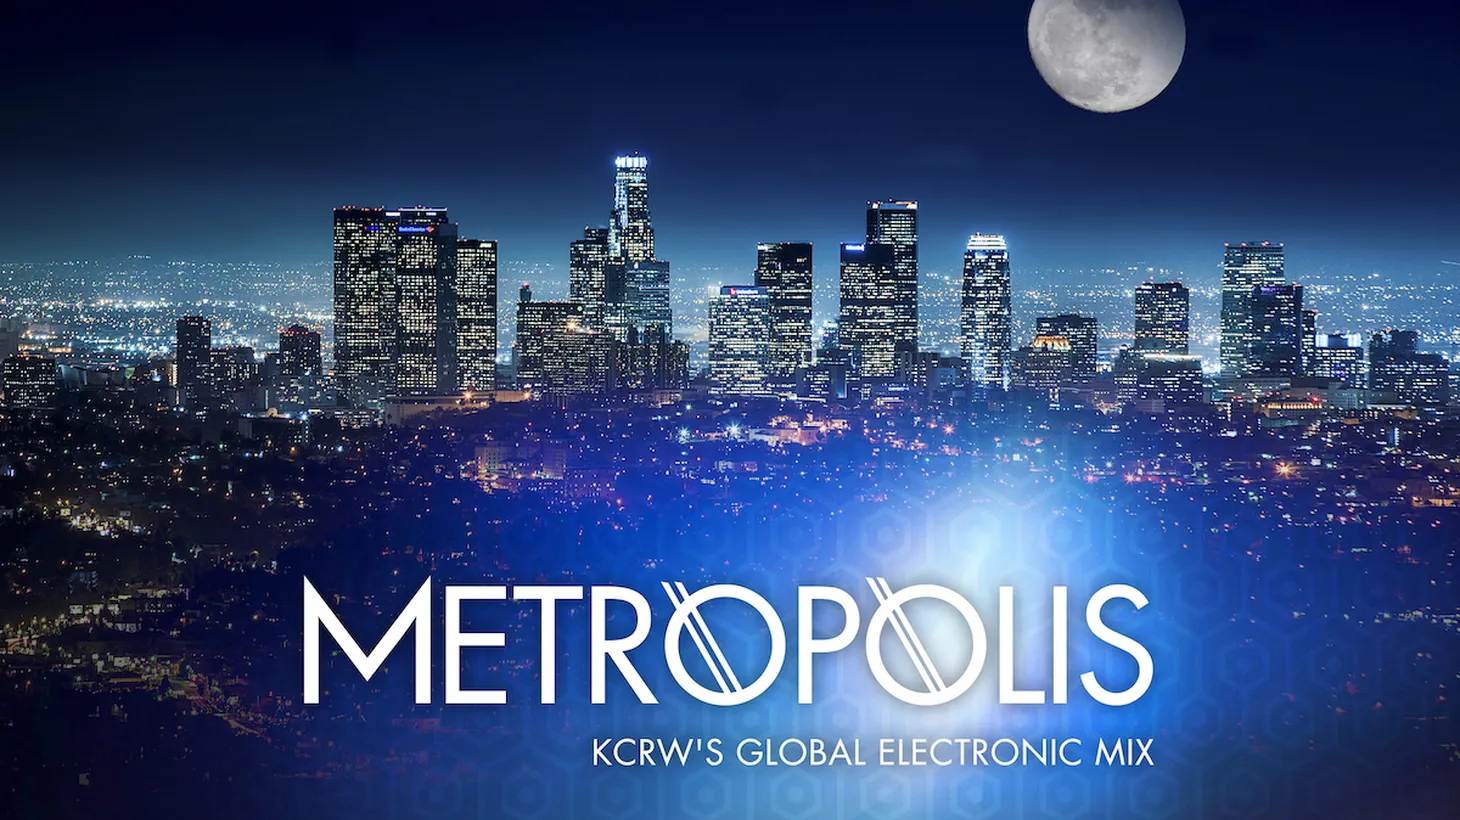 Louie Vega recently recorded an exclusive mix for KCRW’s Metropolis that will have you moving and grooving to the deep House sound.